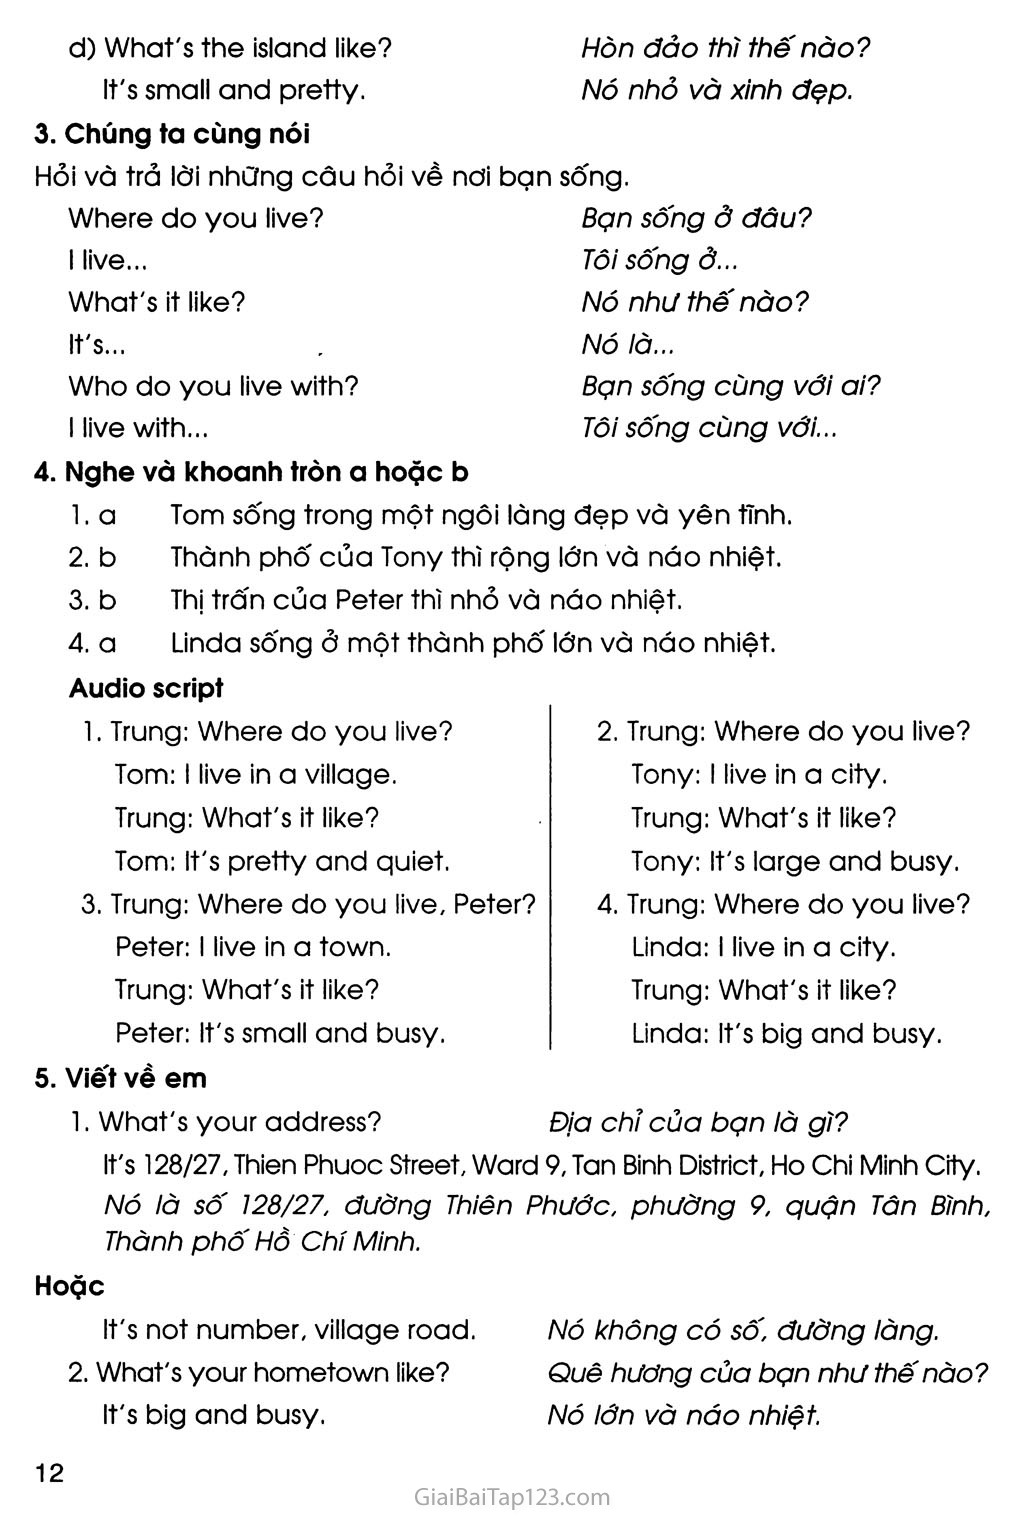 UNIT 1: WHAT'S YOUR ADDRESS? trang 8